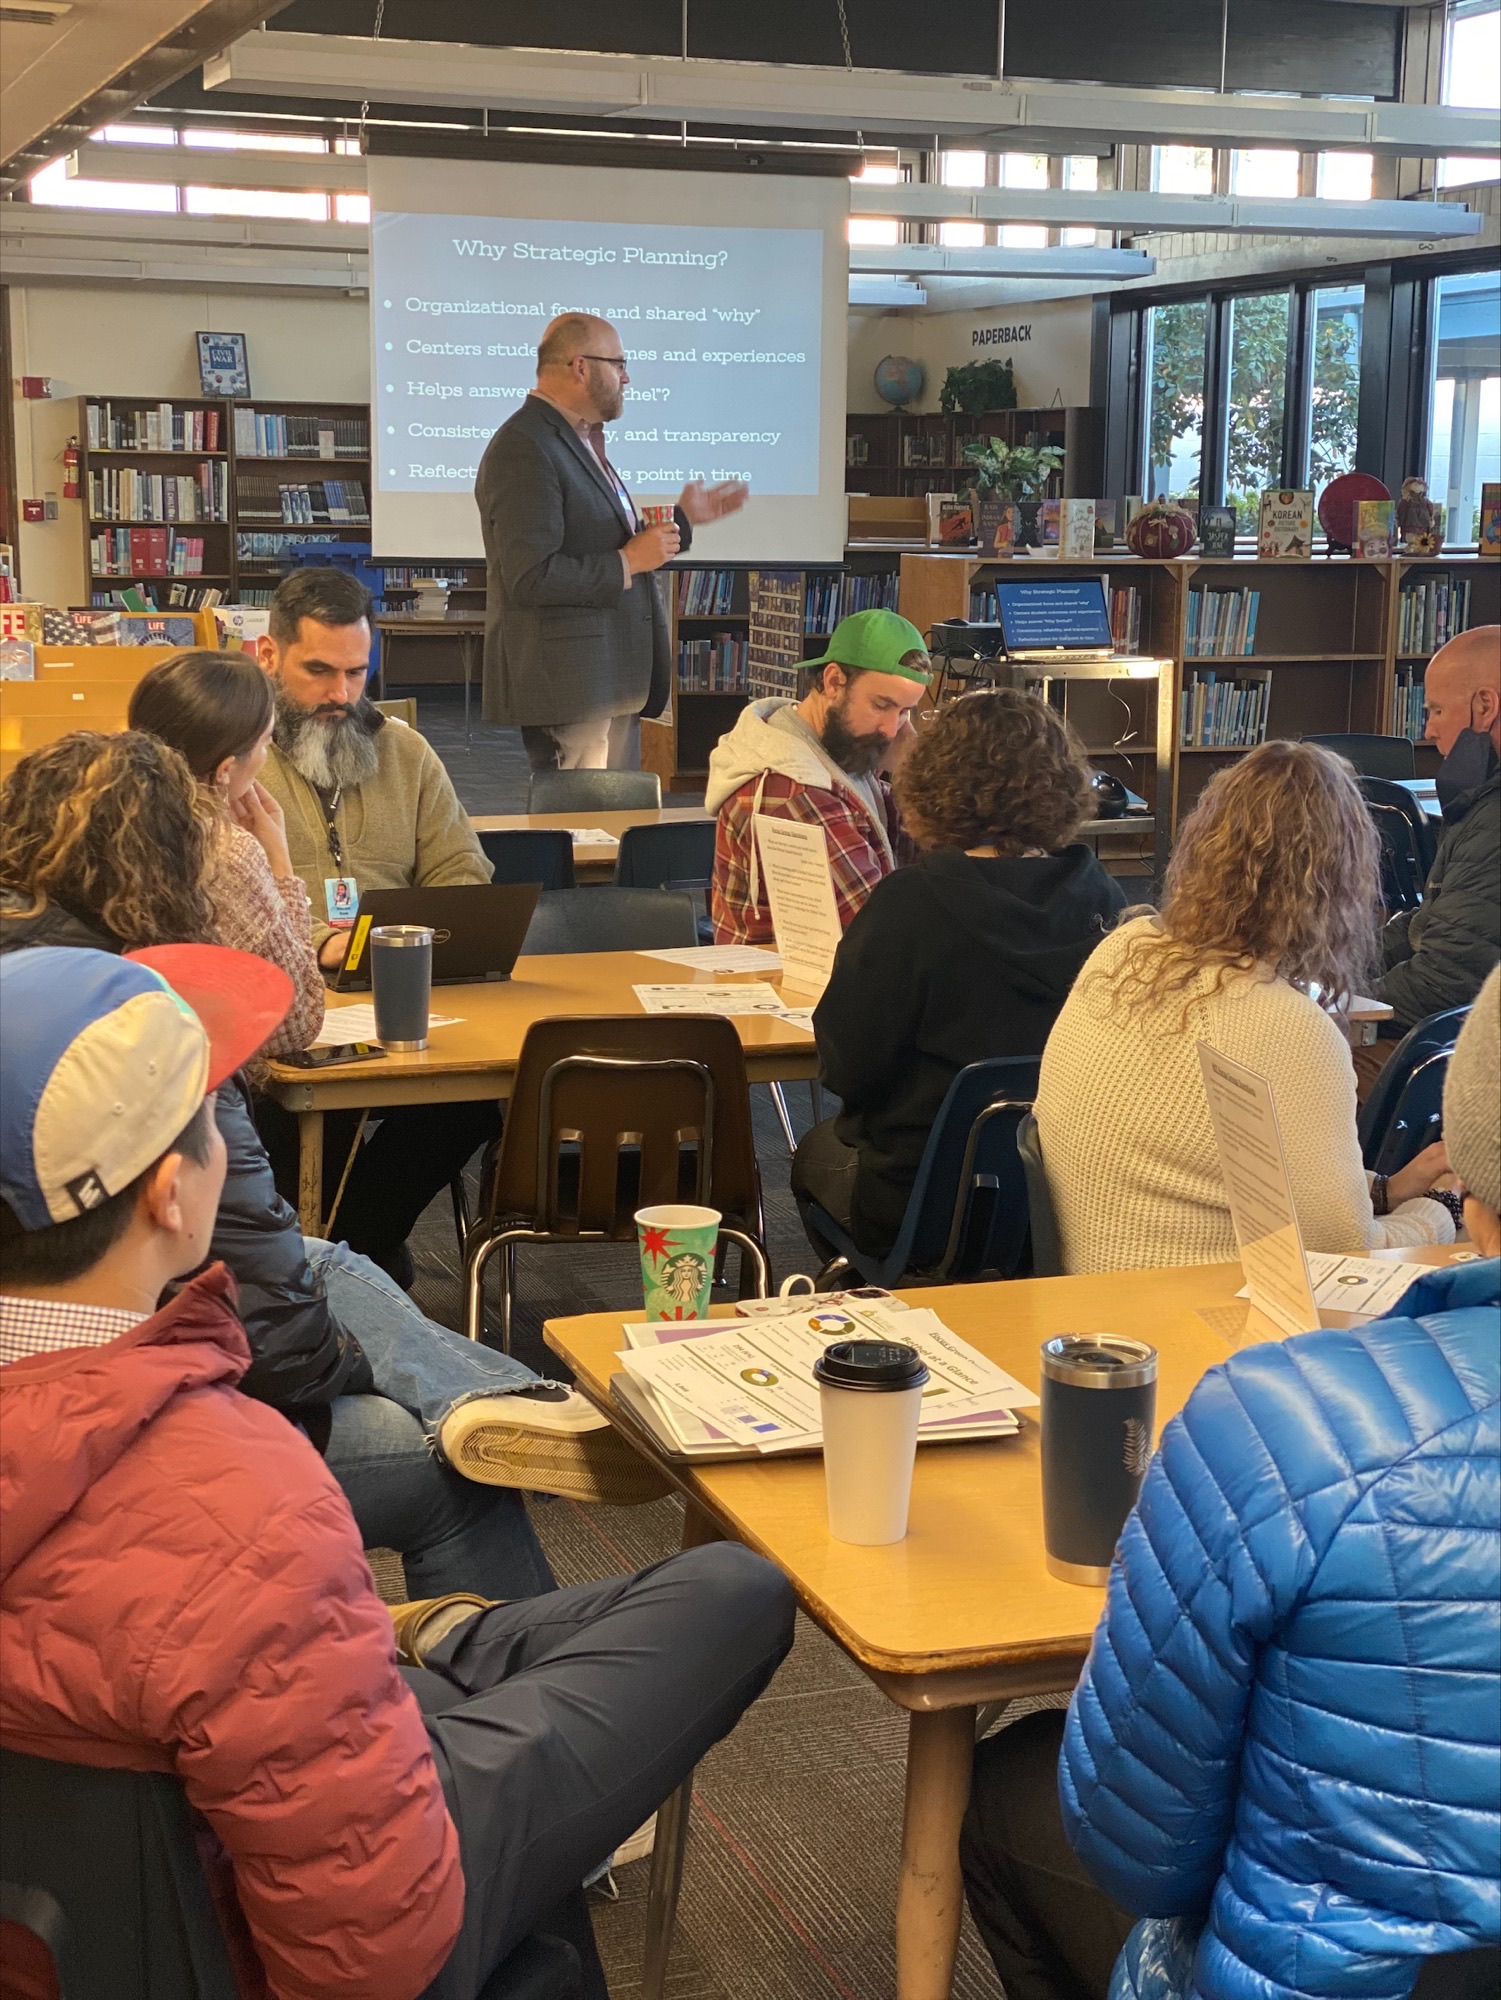 Superintendent Kraig Sproles provides an overview of Bethel's Strategic Planning process in the Shasta Library. Groups of staff members are gathered at various tables. 